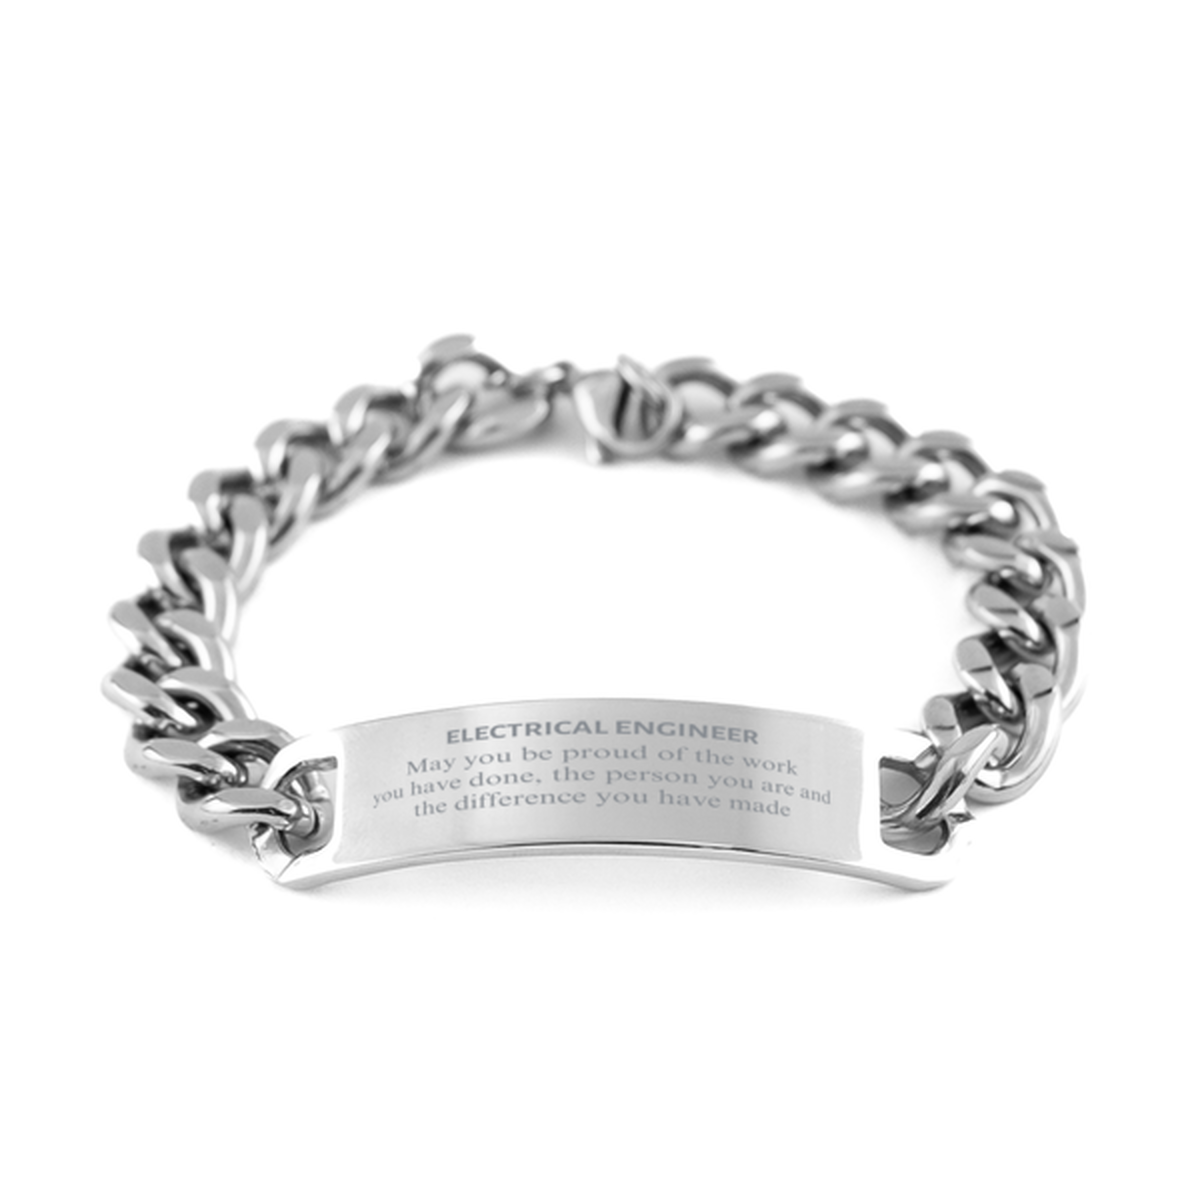 Electrical Engineer May you be proud of the work you have done, Retirement Electrical Engineer Cuban Chain Stainless Steel Bracelet for Colleague Appreciation Gifts Amazing for Electrical Engineer